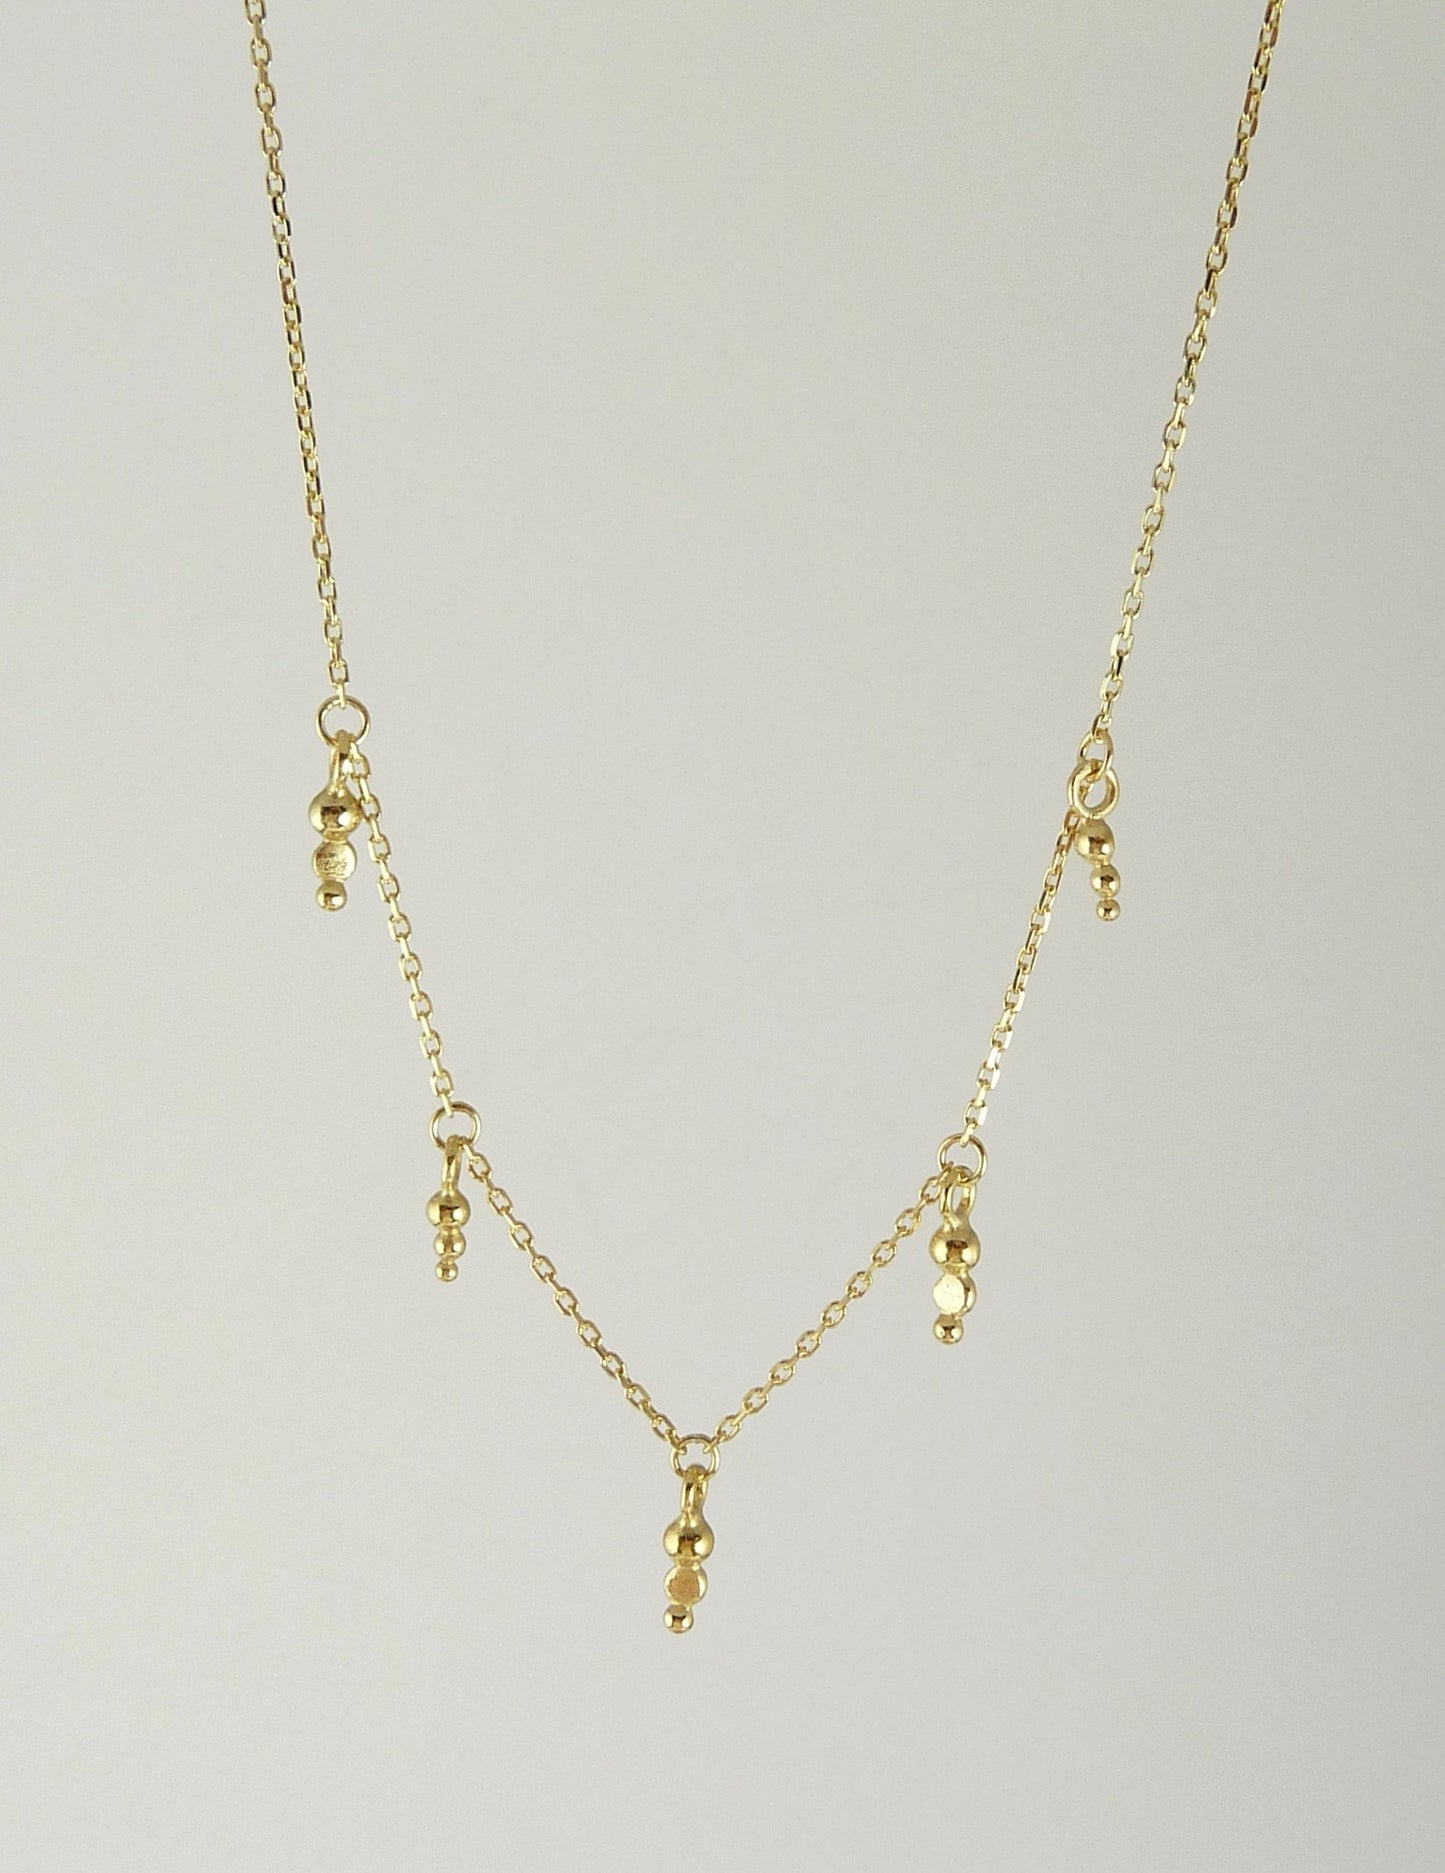 Leilah Dotted Delicate Granulation Necklace